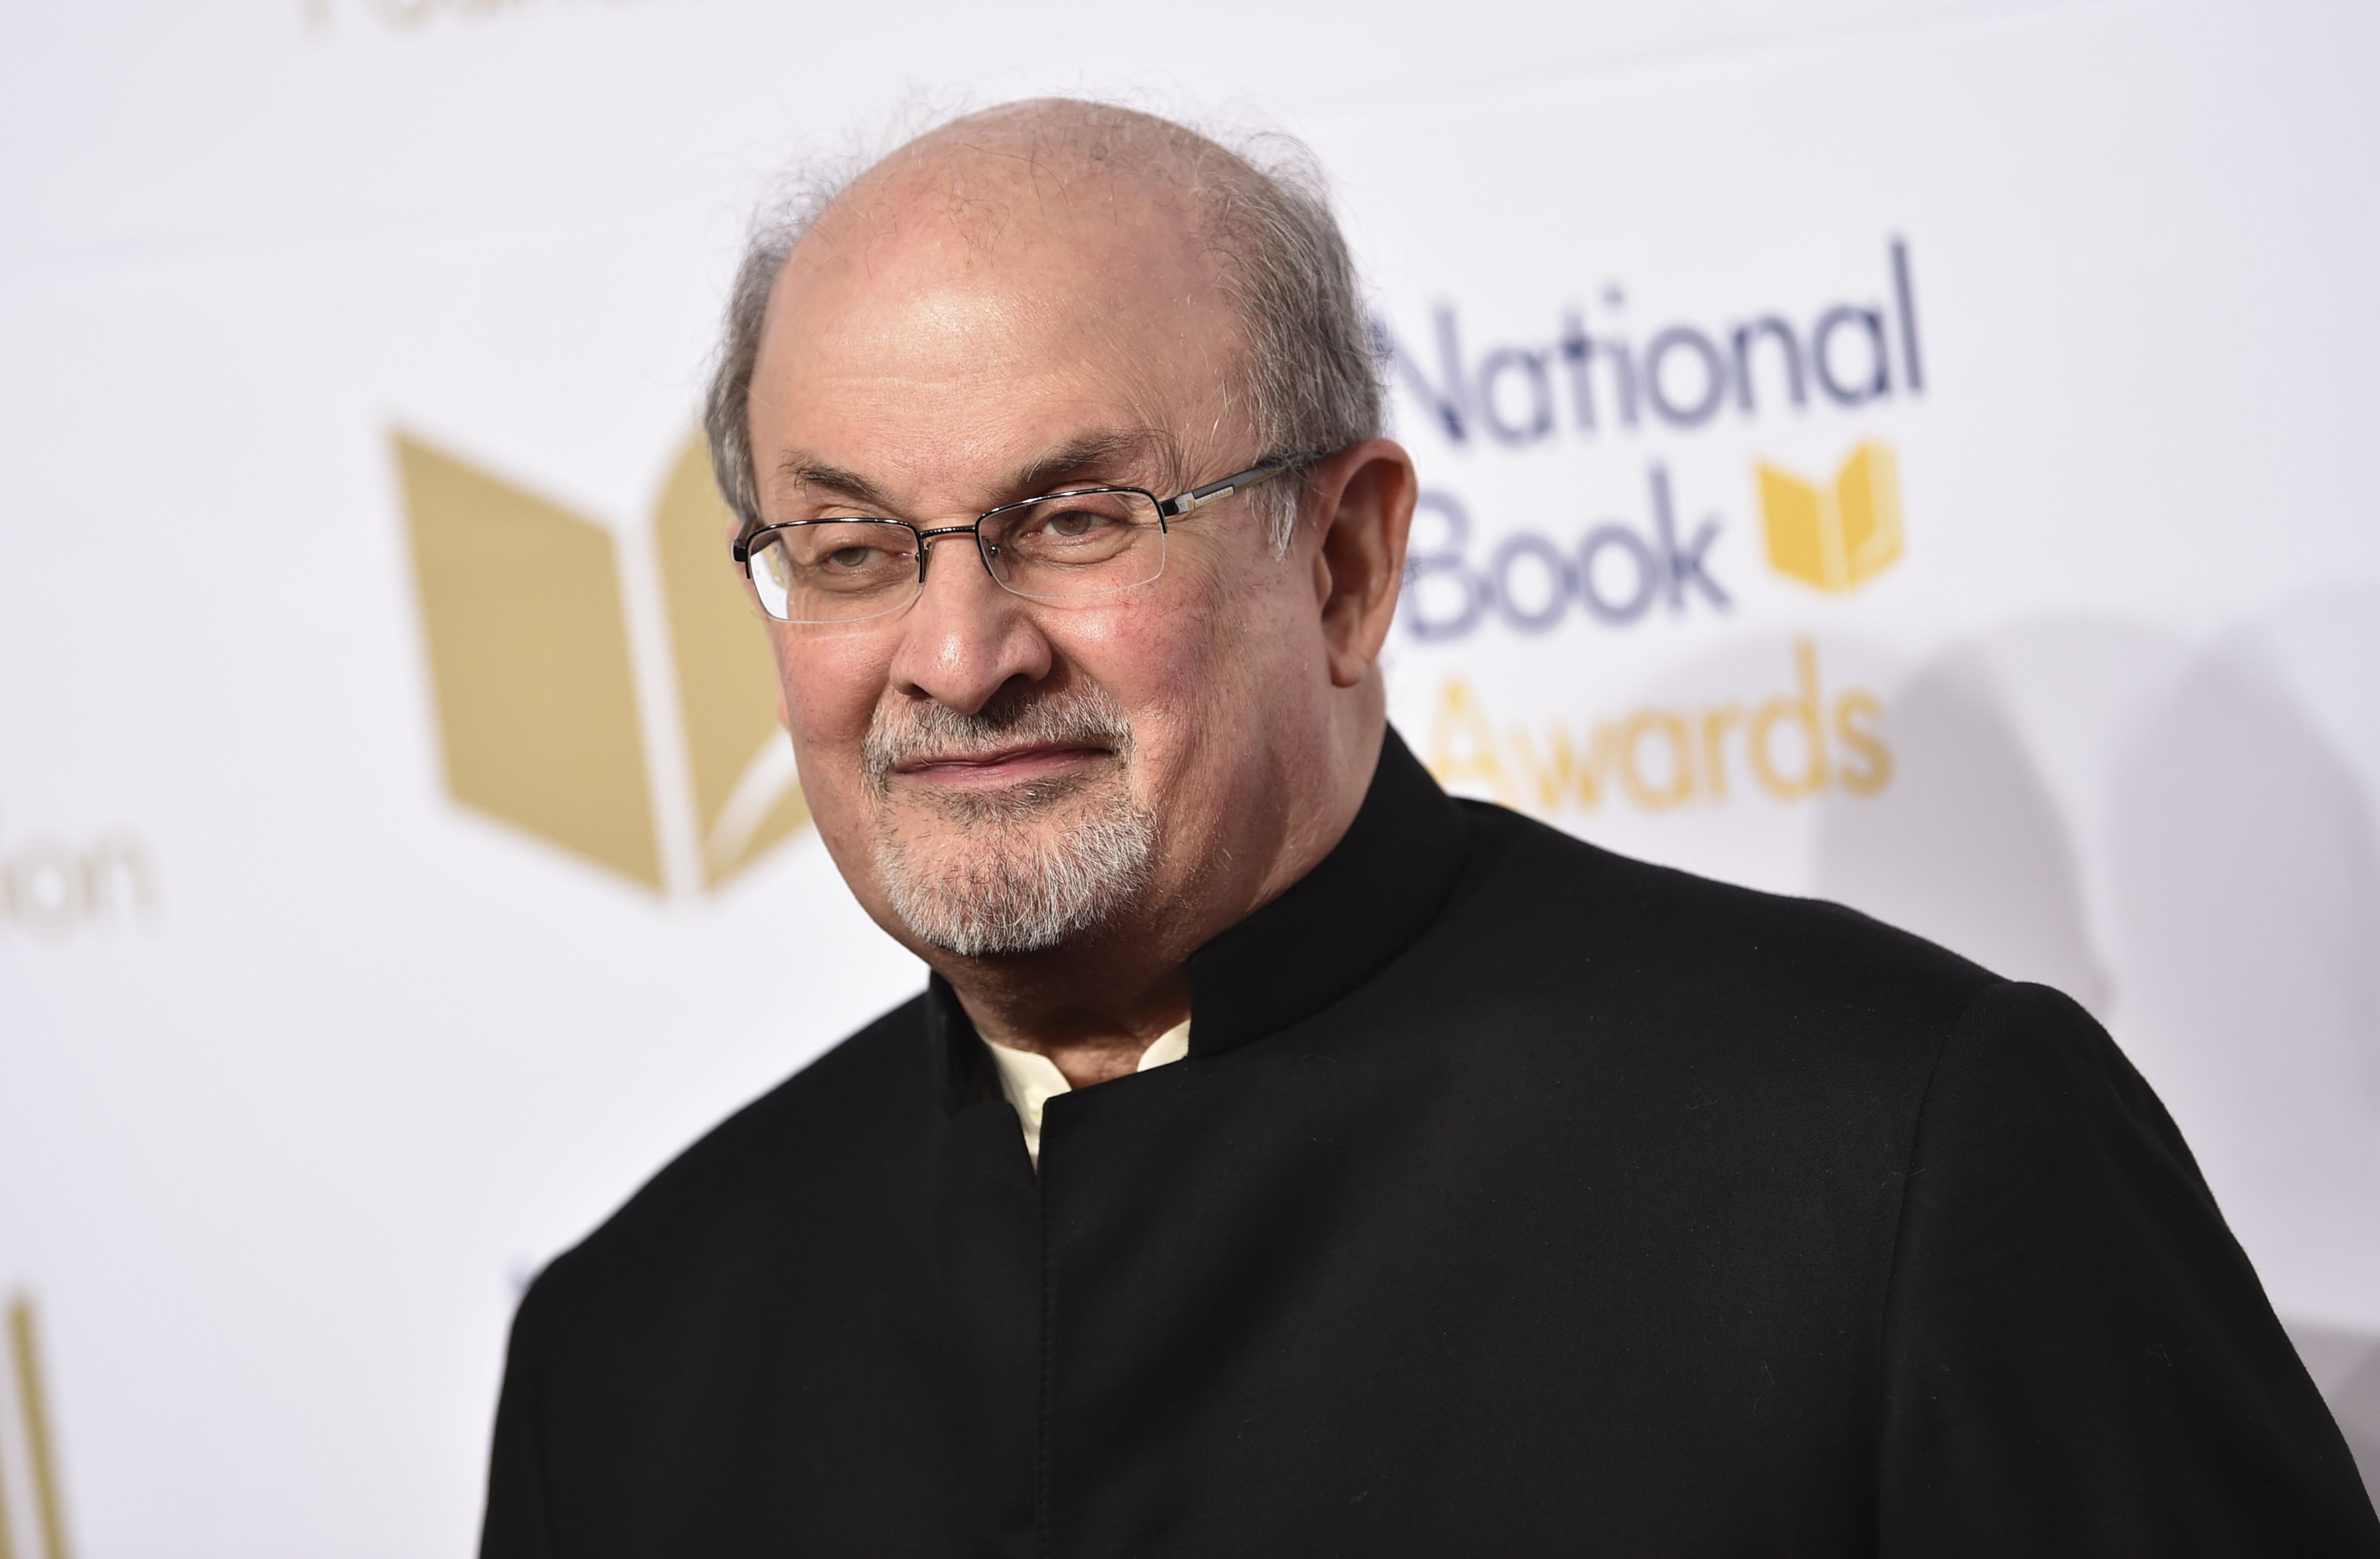 Although Rushdie repeatedly apologized publicly, the fatwa declared against him was never revoked. 